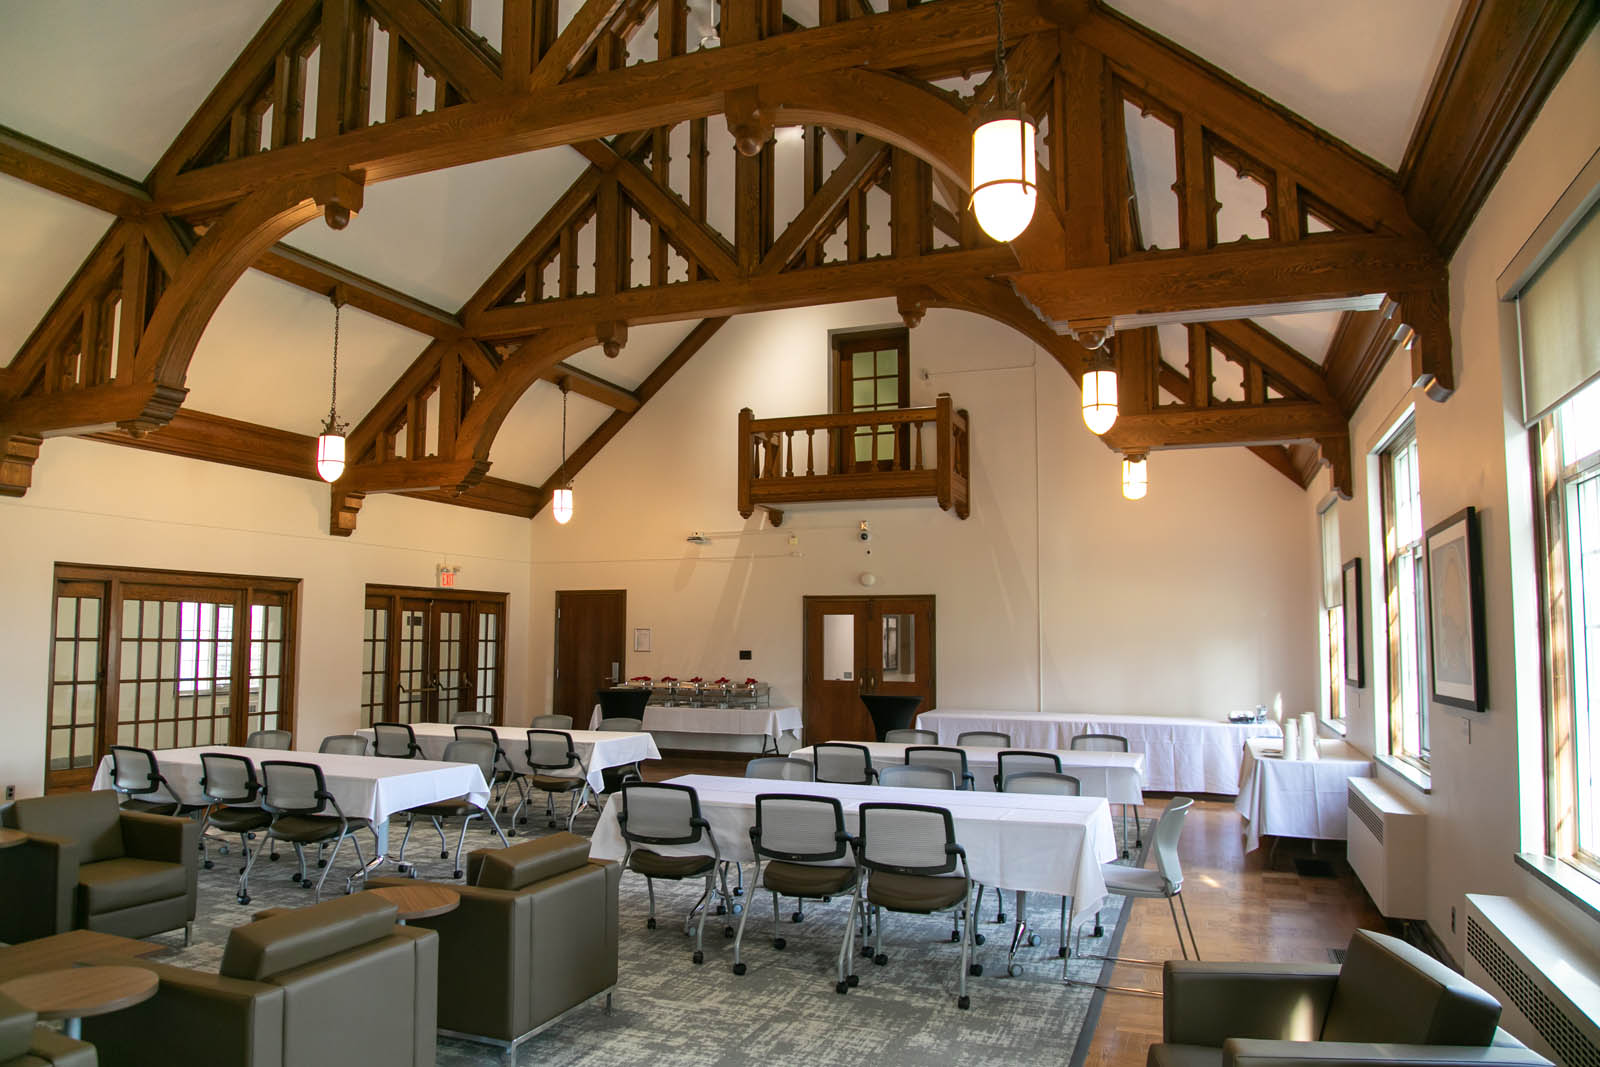 A room with high vaulted ceilings and decorative wooden embellishments setup for a conference with 4 tables and mixed seating for 30 people